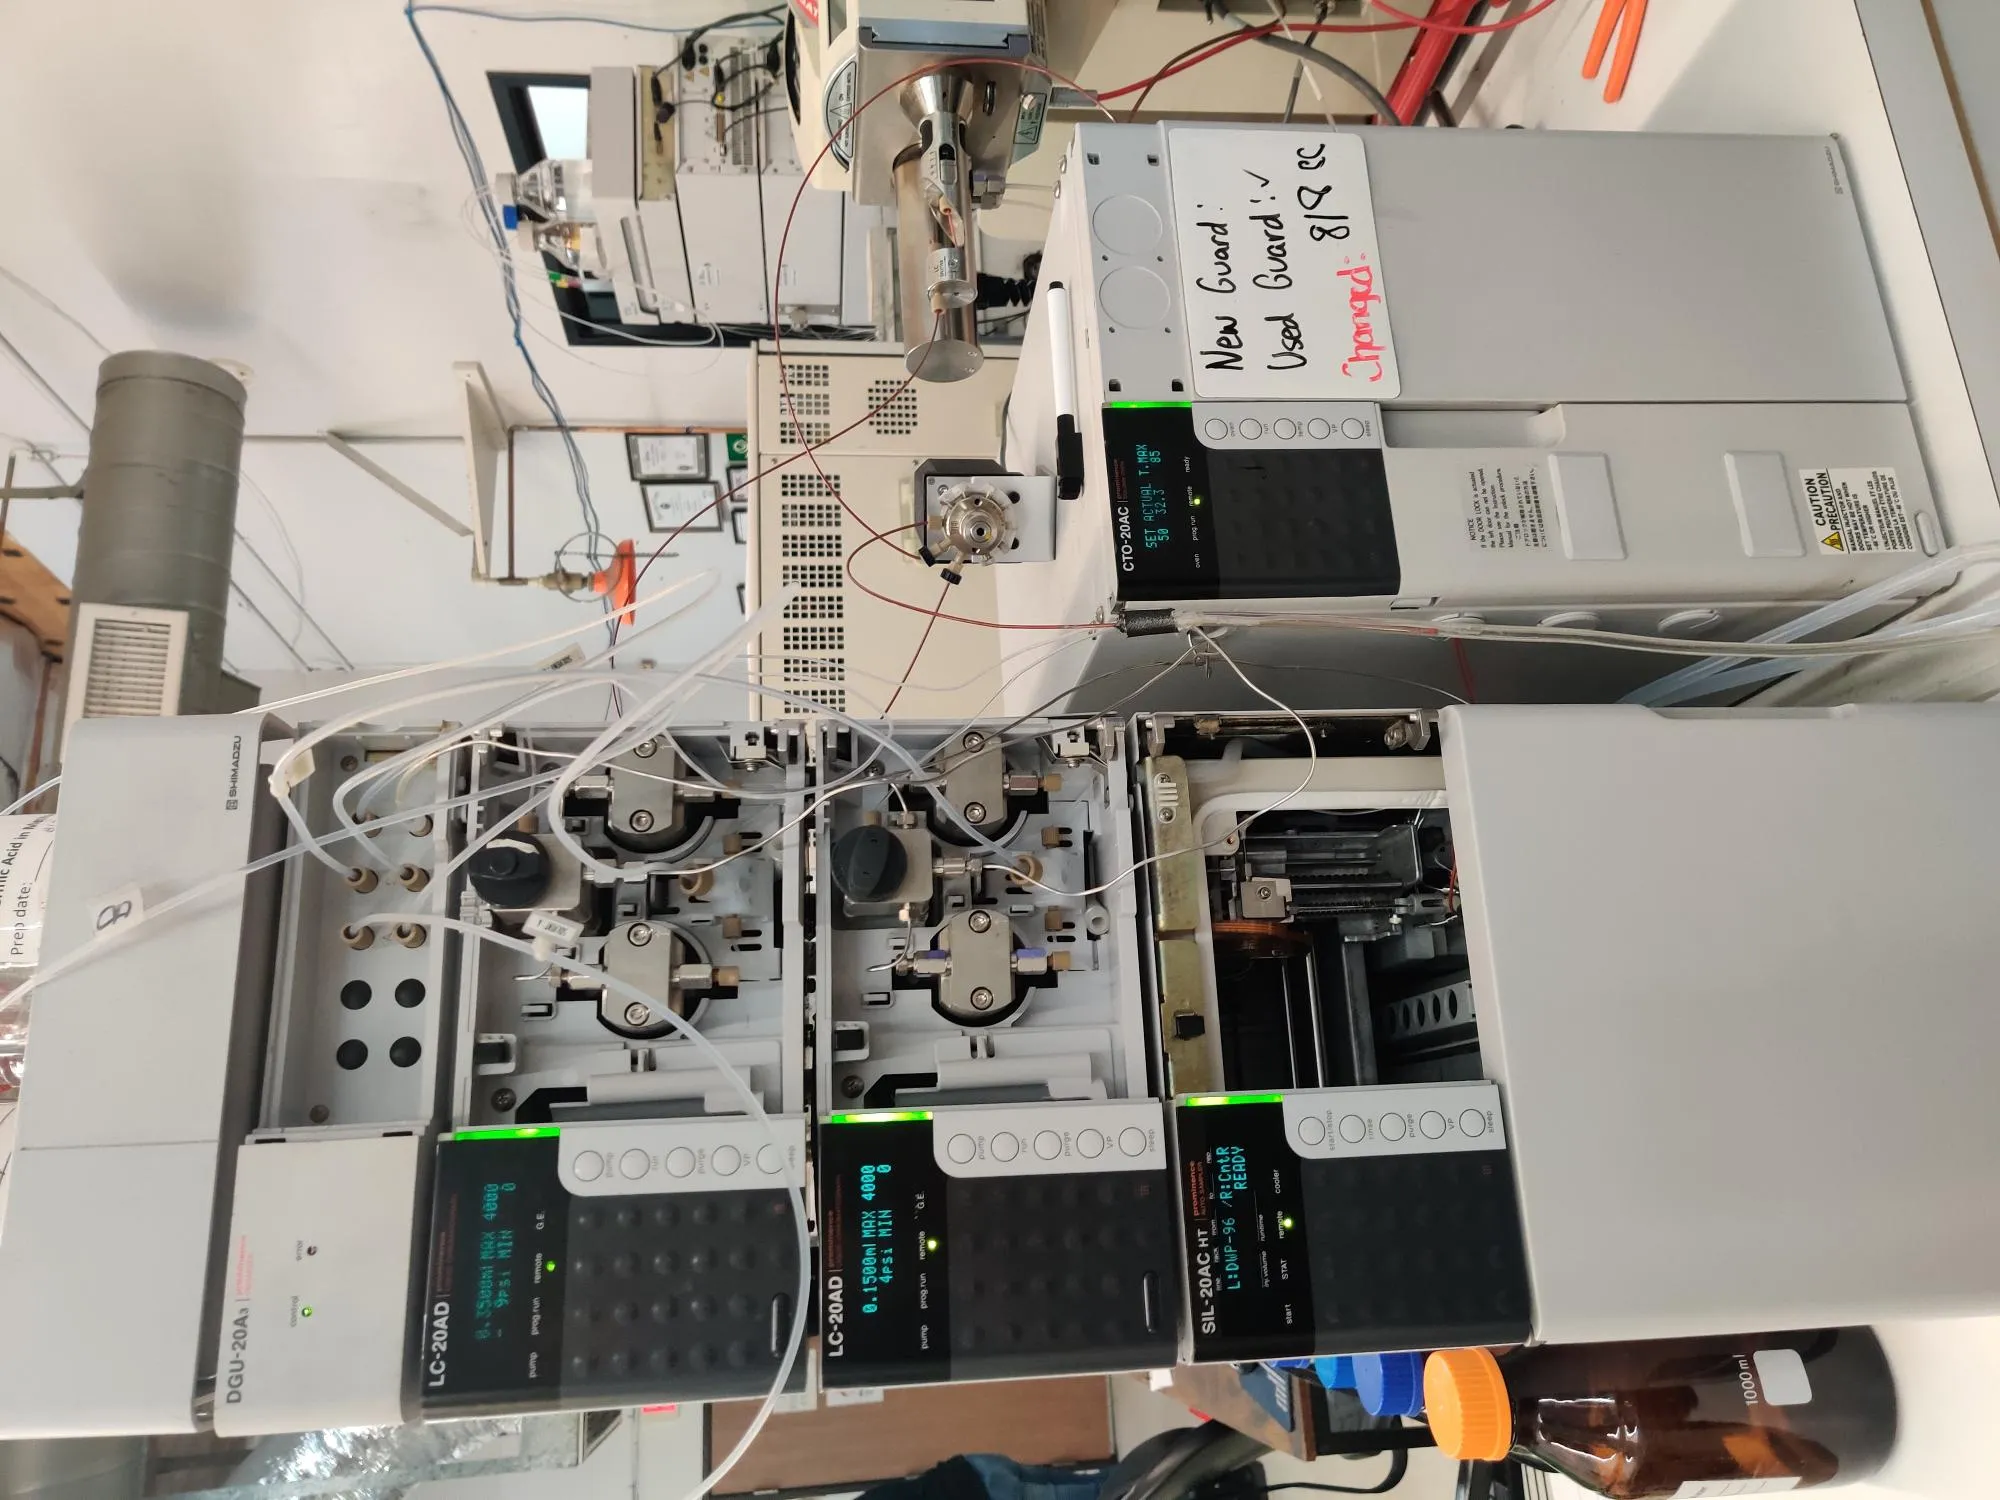 ABSciex LCMS 3000 with Autosampler, Oven, LCMS Pumps and Roughing Pump